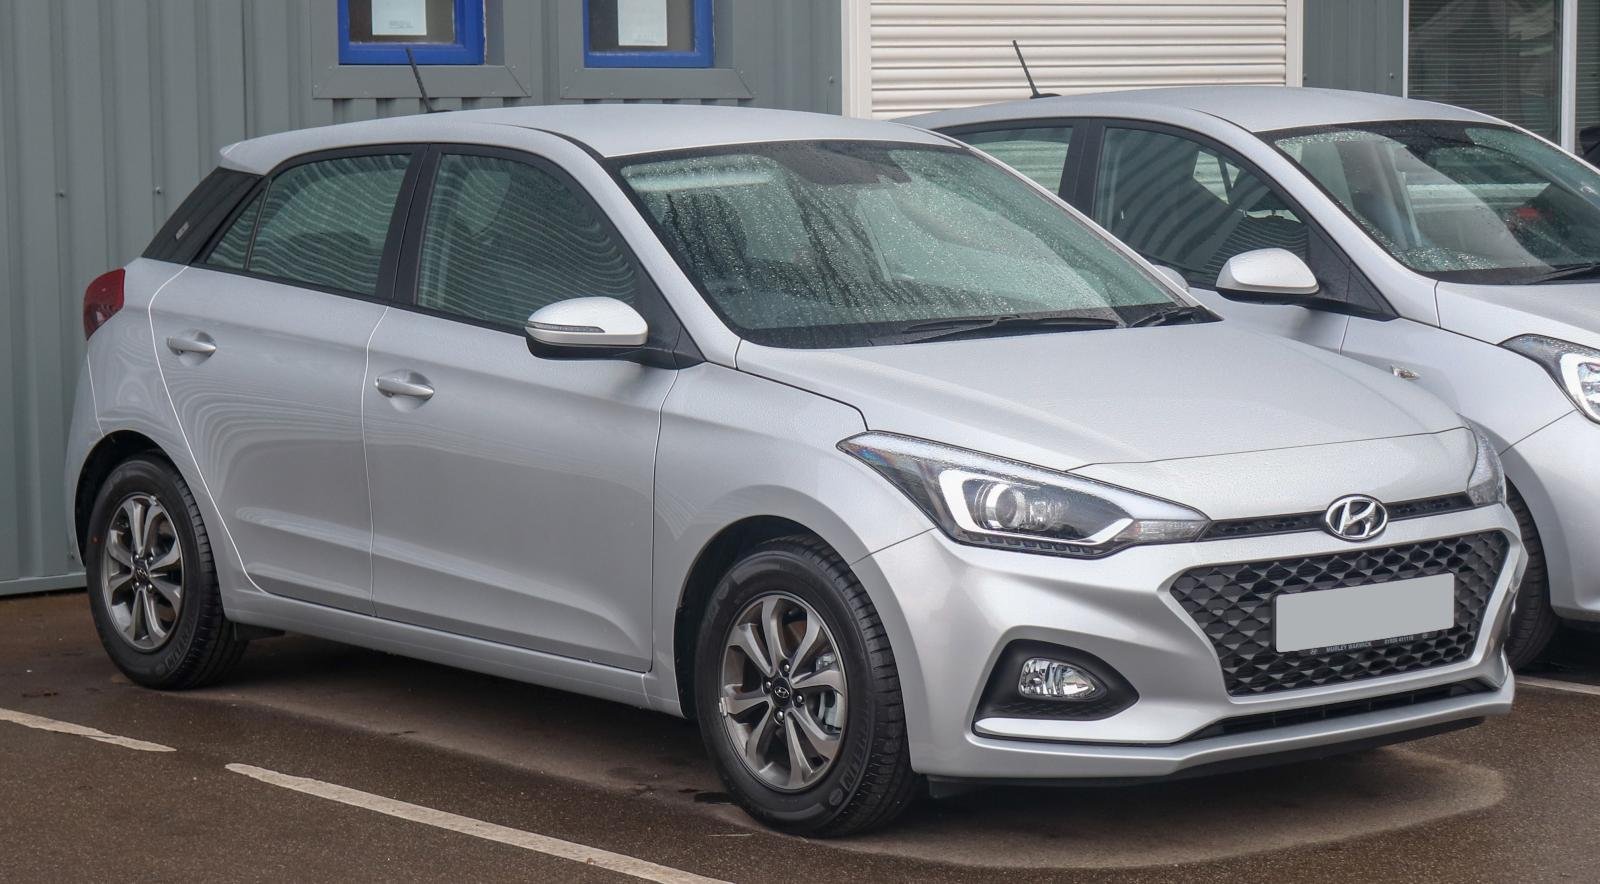 deliveries commence for Hyundai i20 BS6